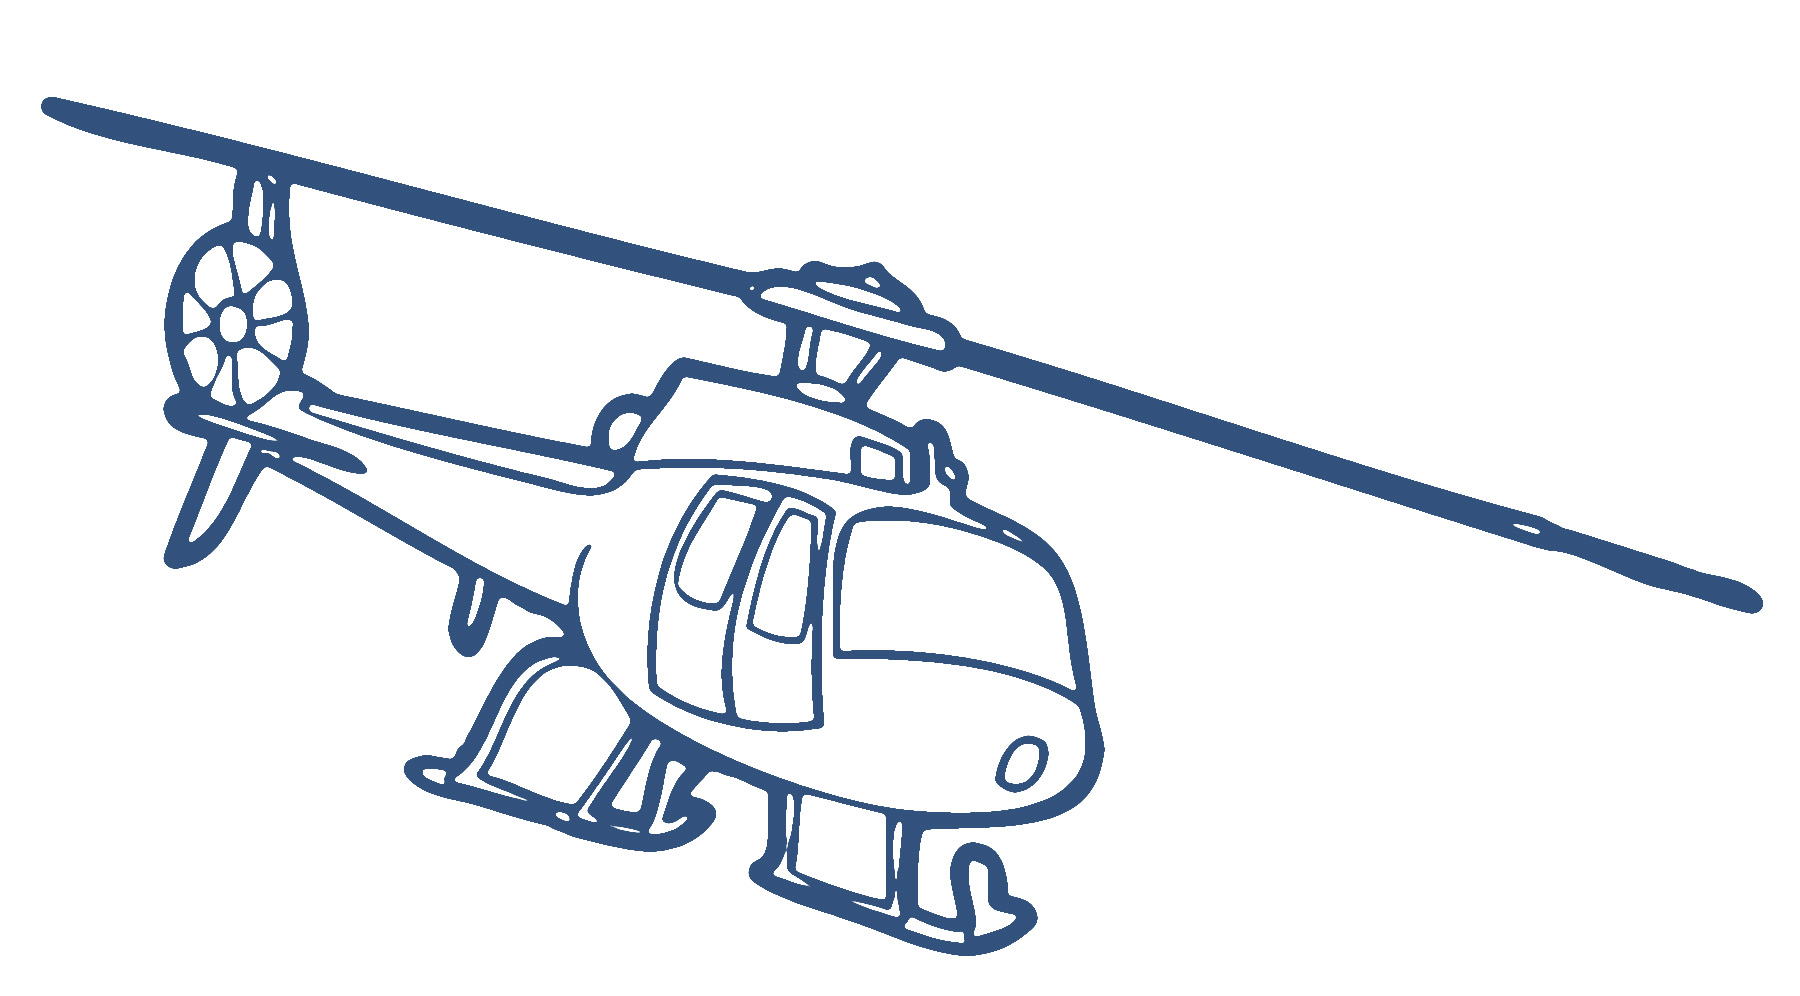 Military Helicopter Silhouette   Clipart Panda   Free Clipart Images